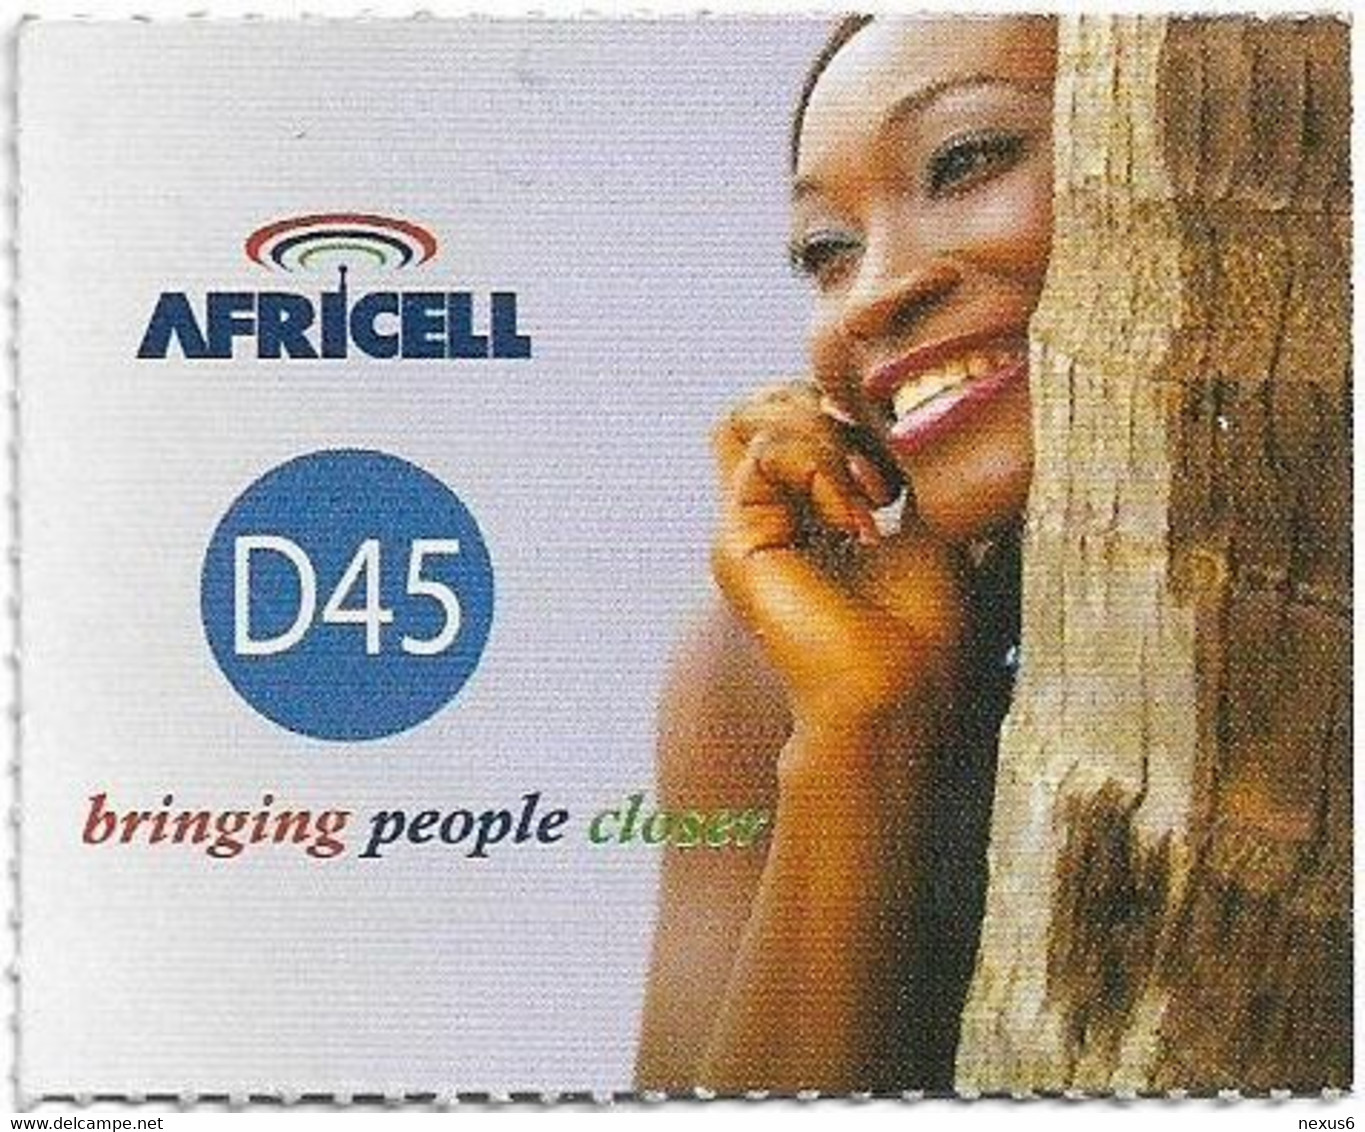 Gambia - Africell - Bringing People Closer, Woman On Phone, GSM Refill 45GD, Used - Gambia